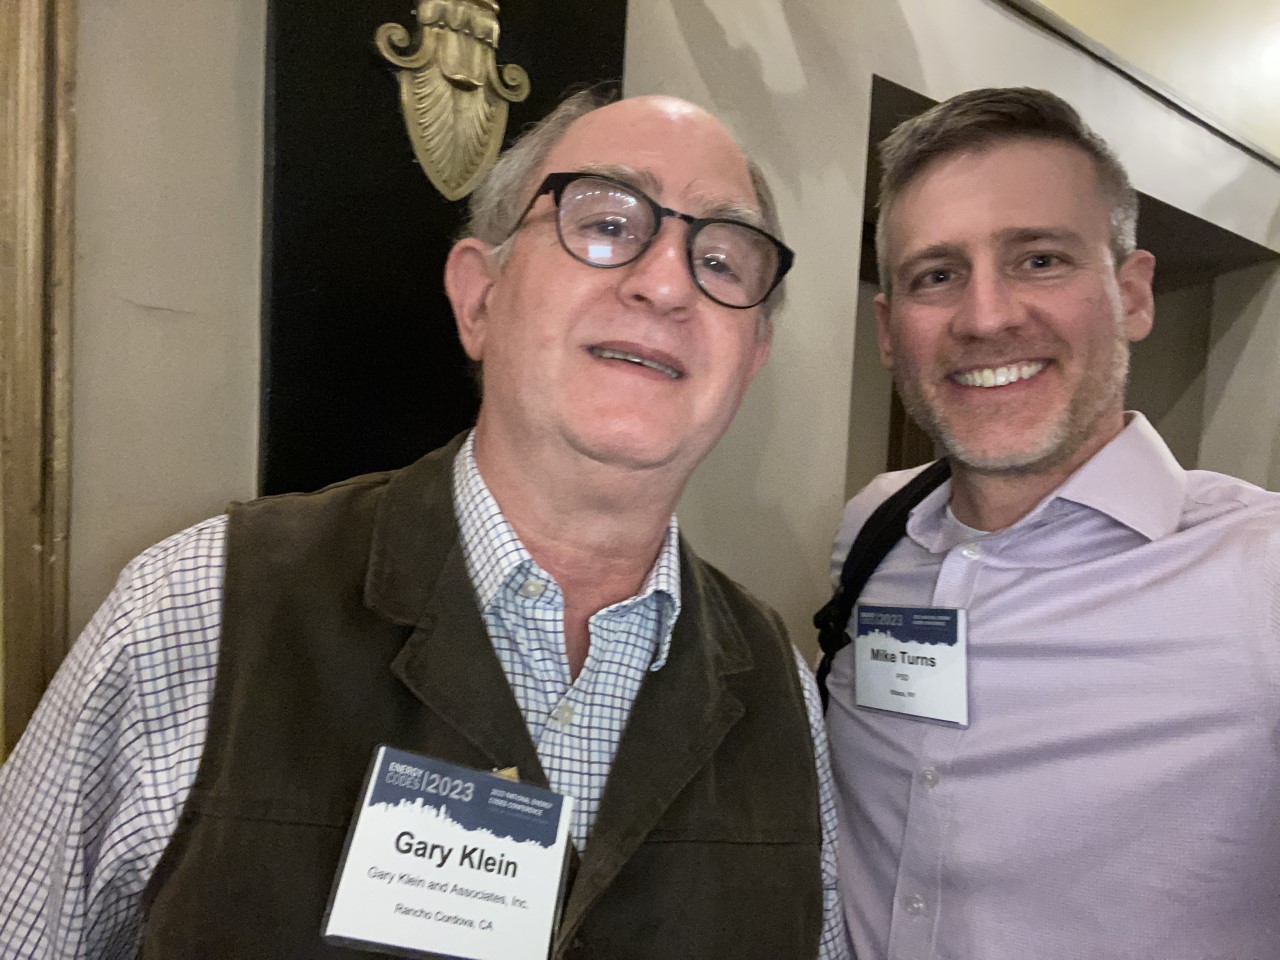 Mike Turns with Gary Klein of Gary Klein and Associates Inc.